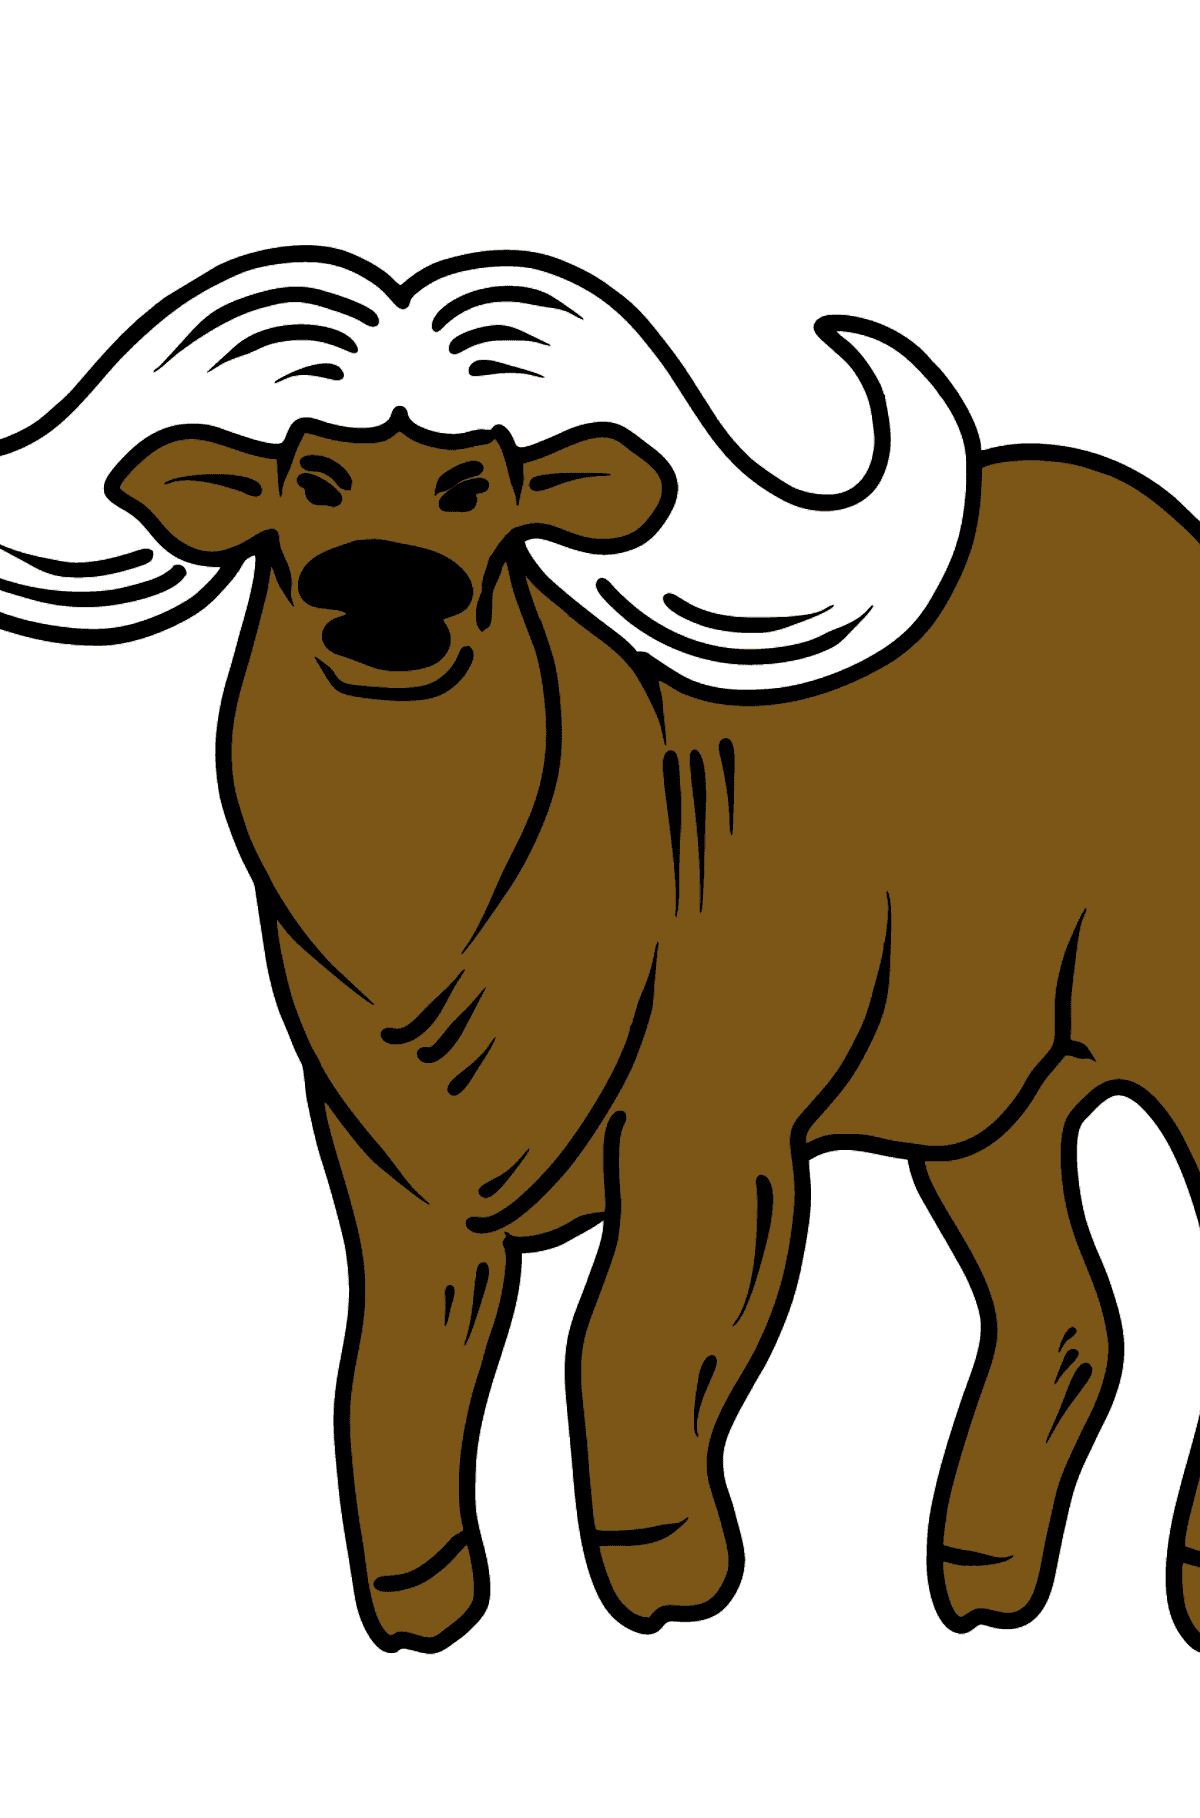 Buffalo coloring page - Coloring Pages for Kids